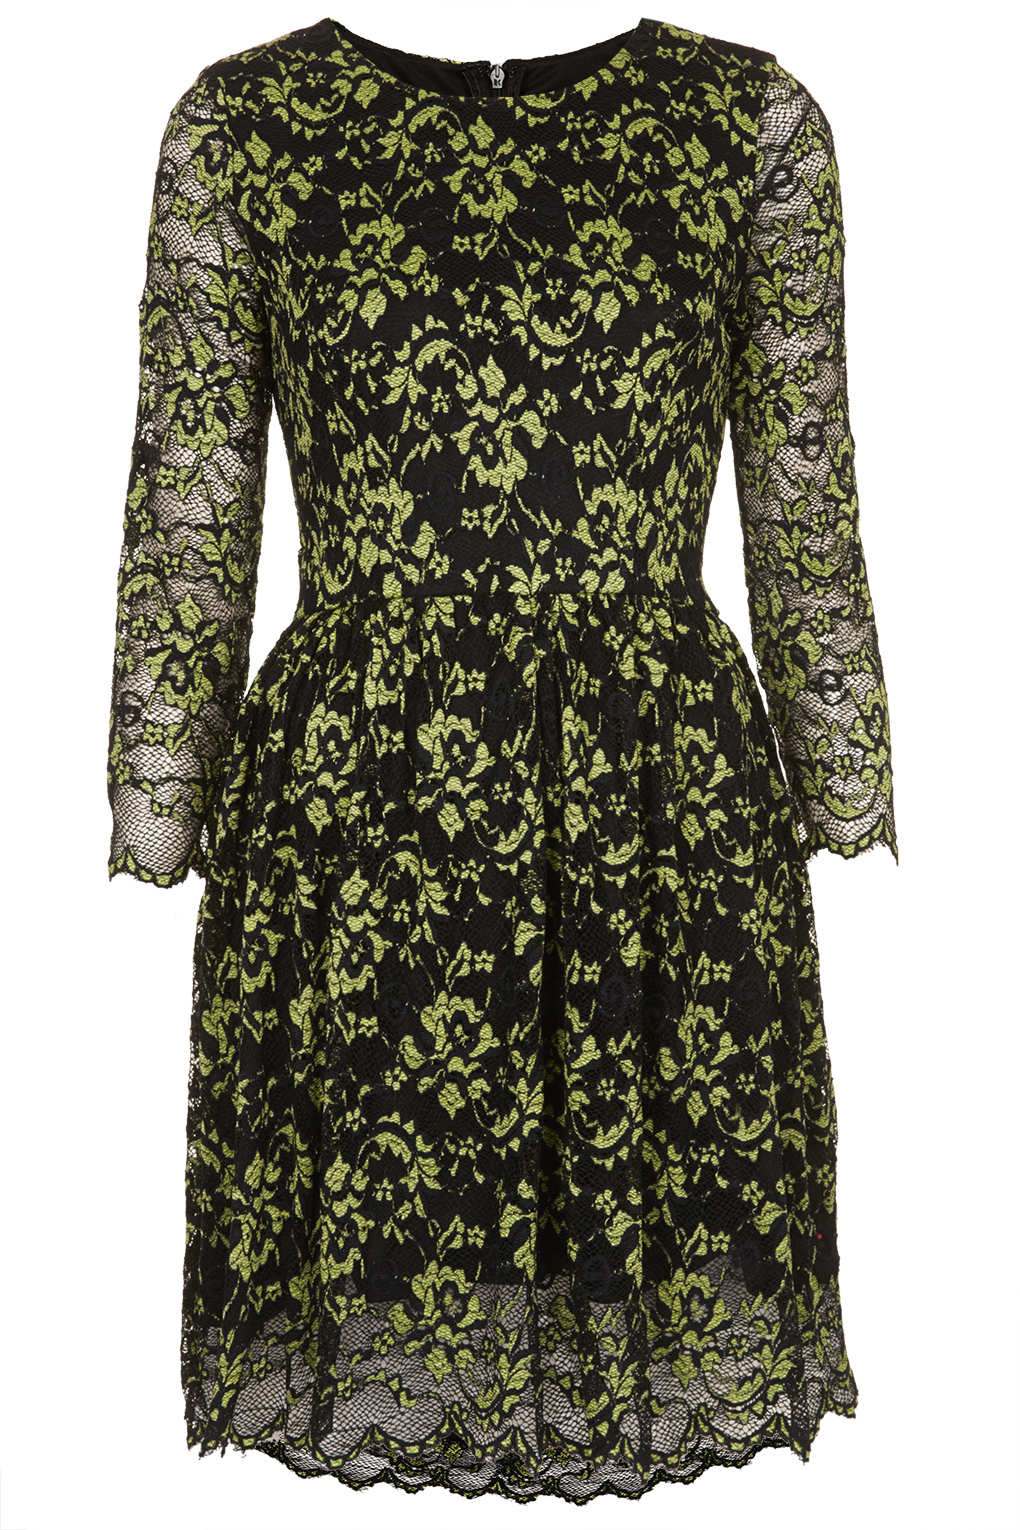 TOPSHOP Ghoul Lace Dip Hem Dress in Bright Green (Green) - Lyst